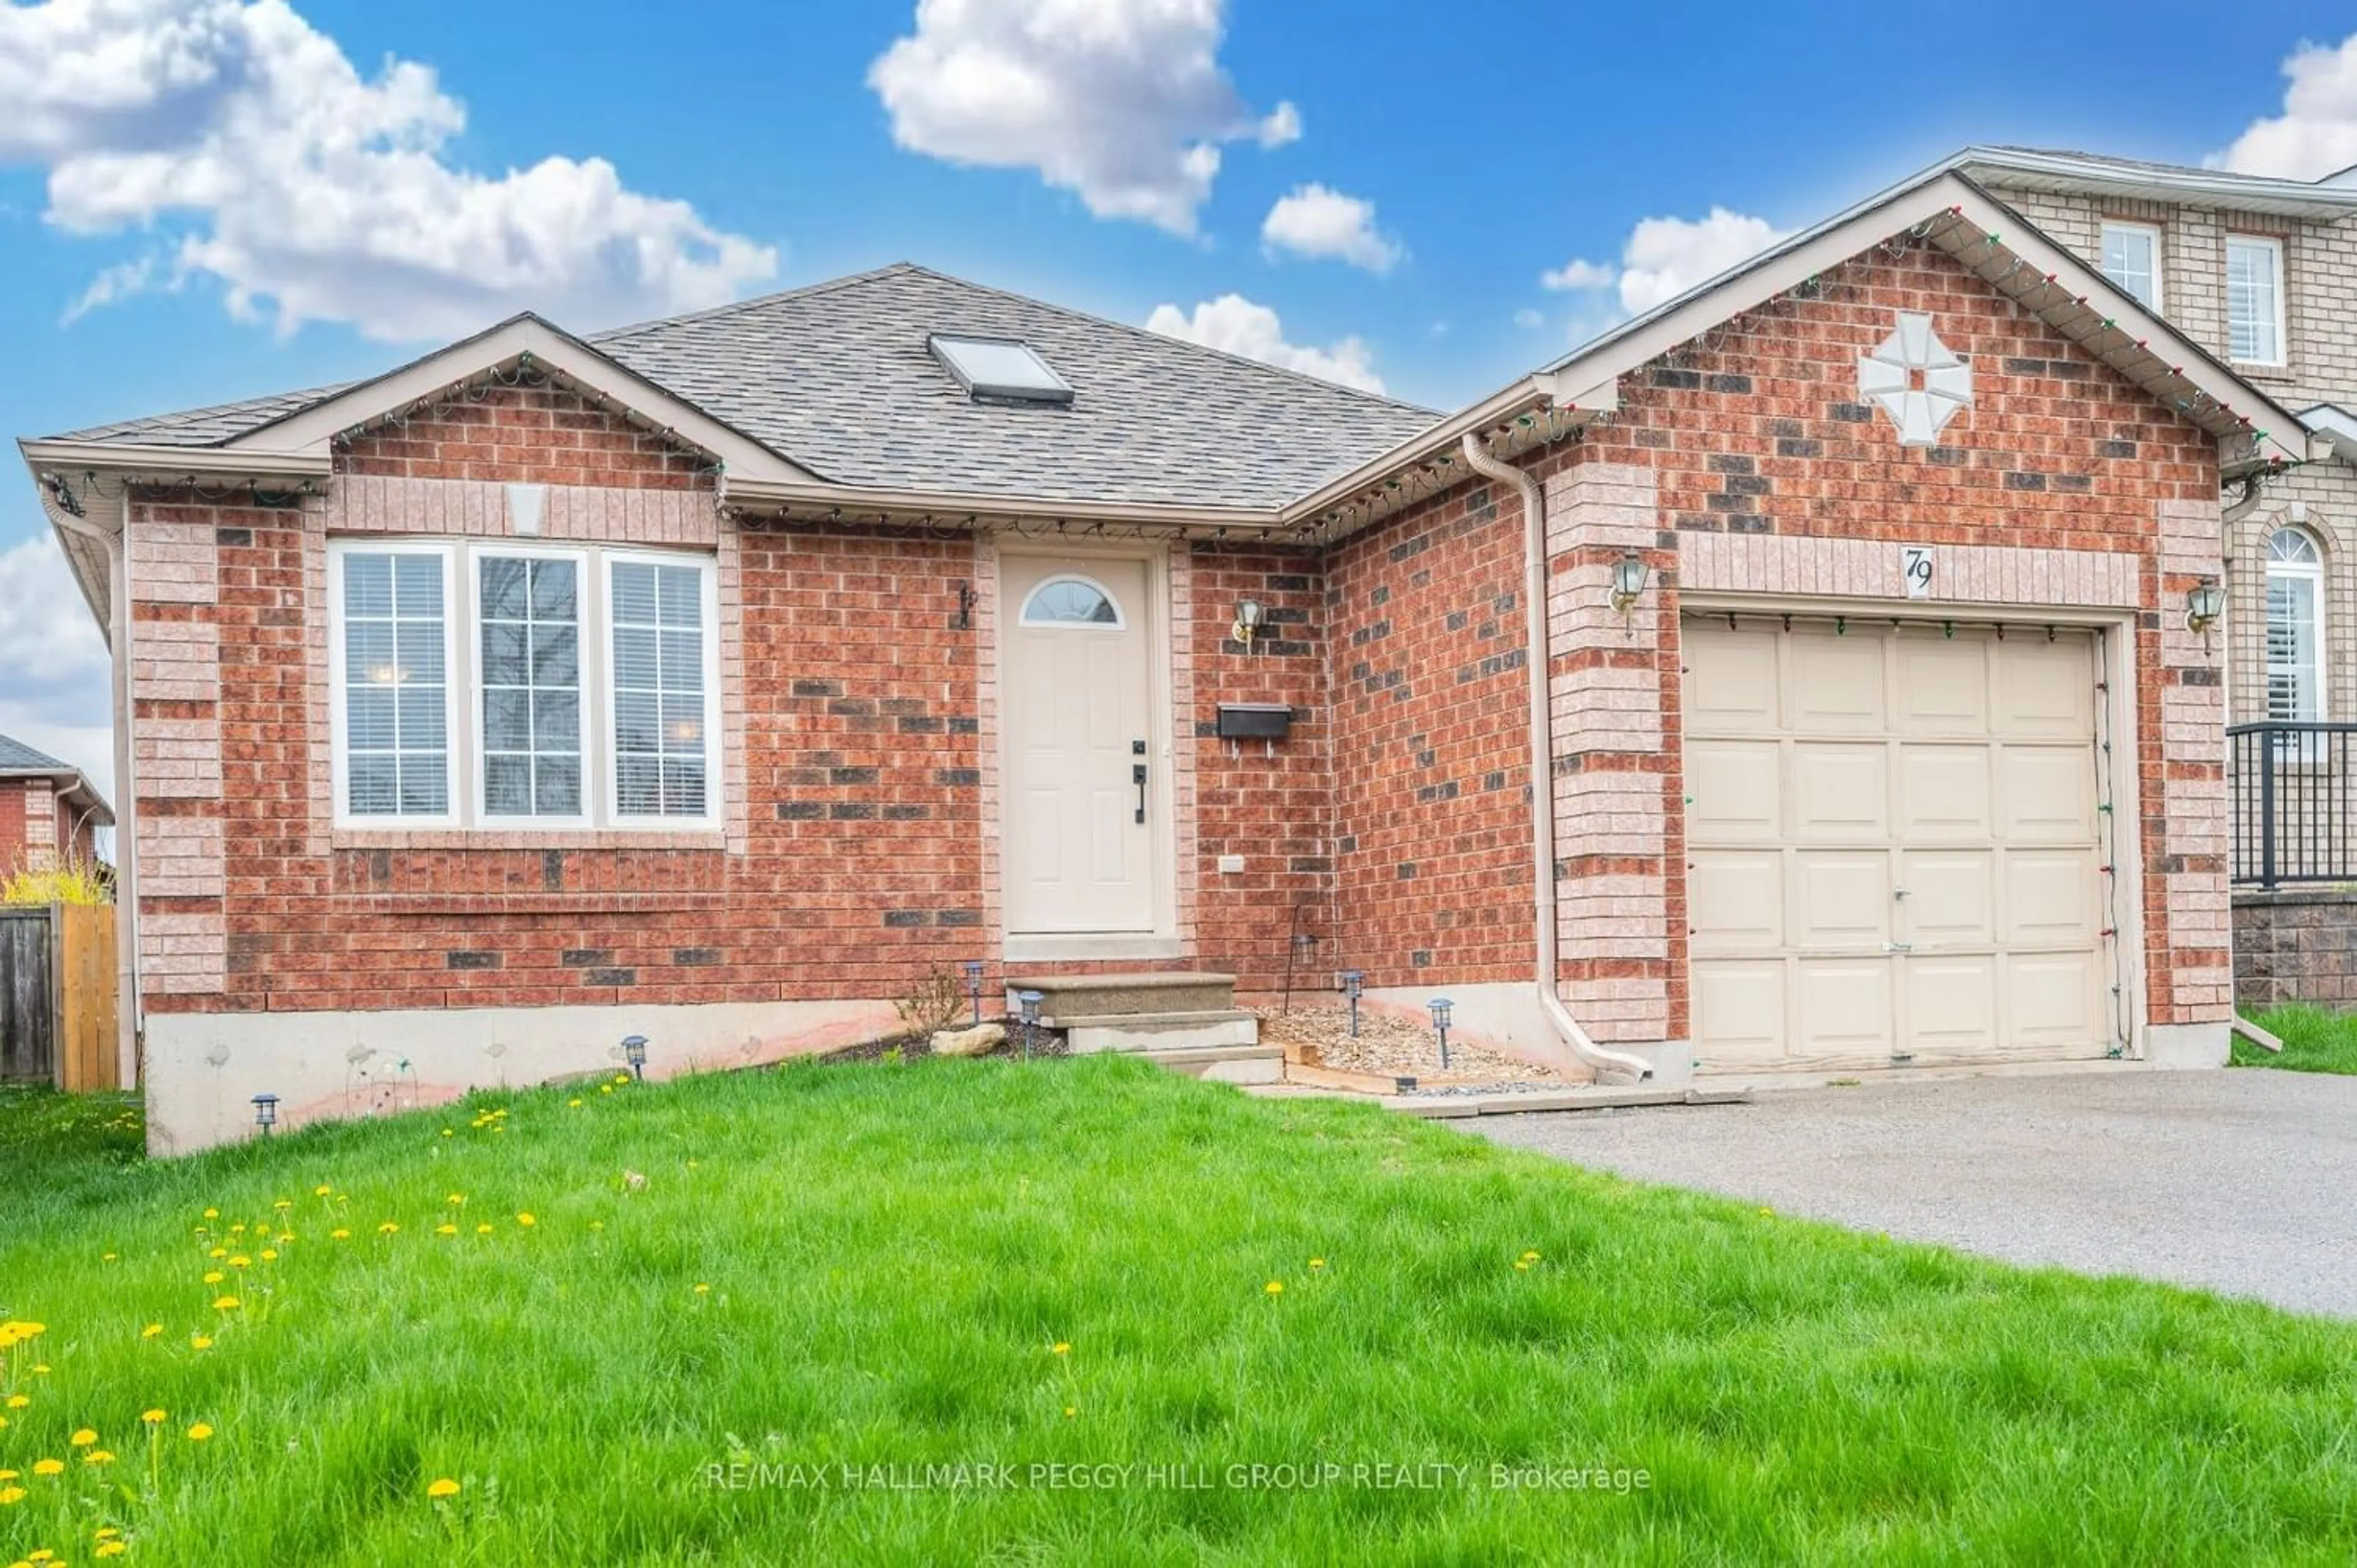 Home with brick exterior material for 79 Ambler Bay, Barrie Ontario L4M 7A6